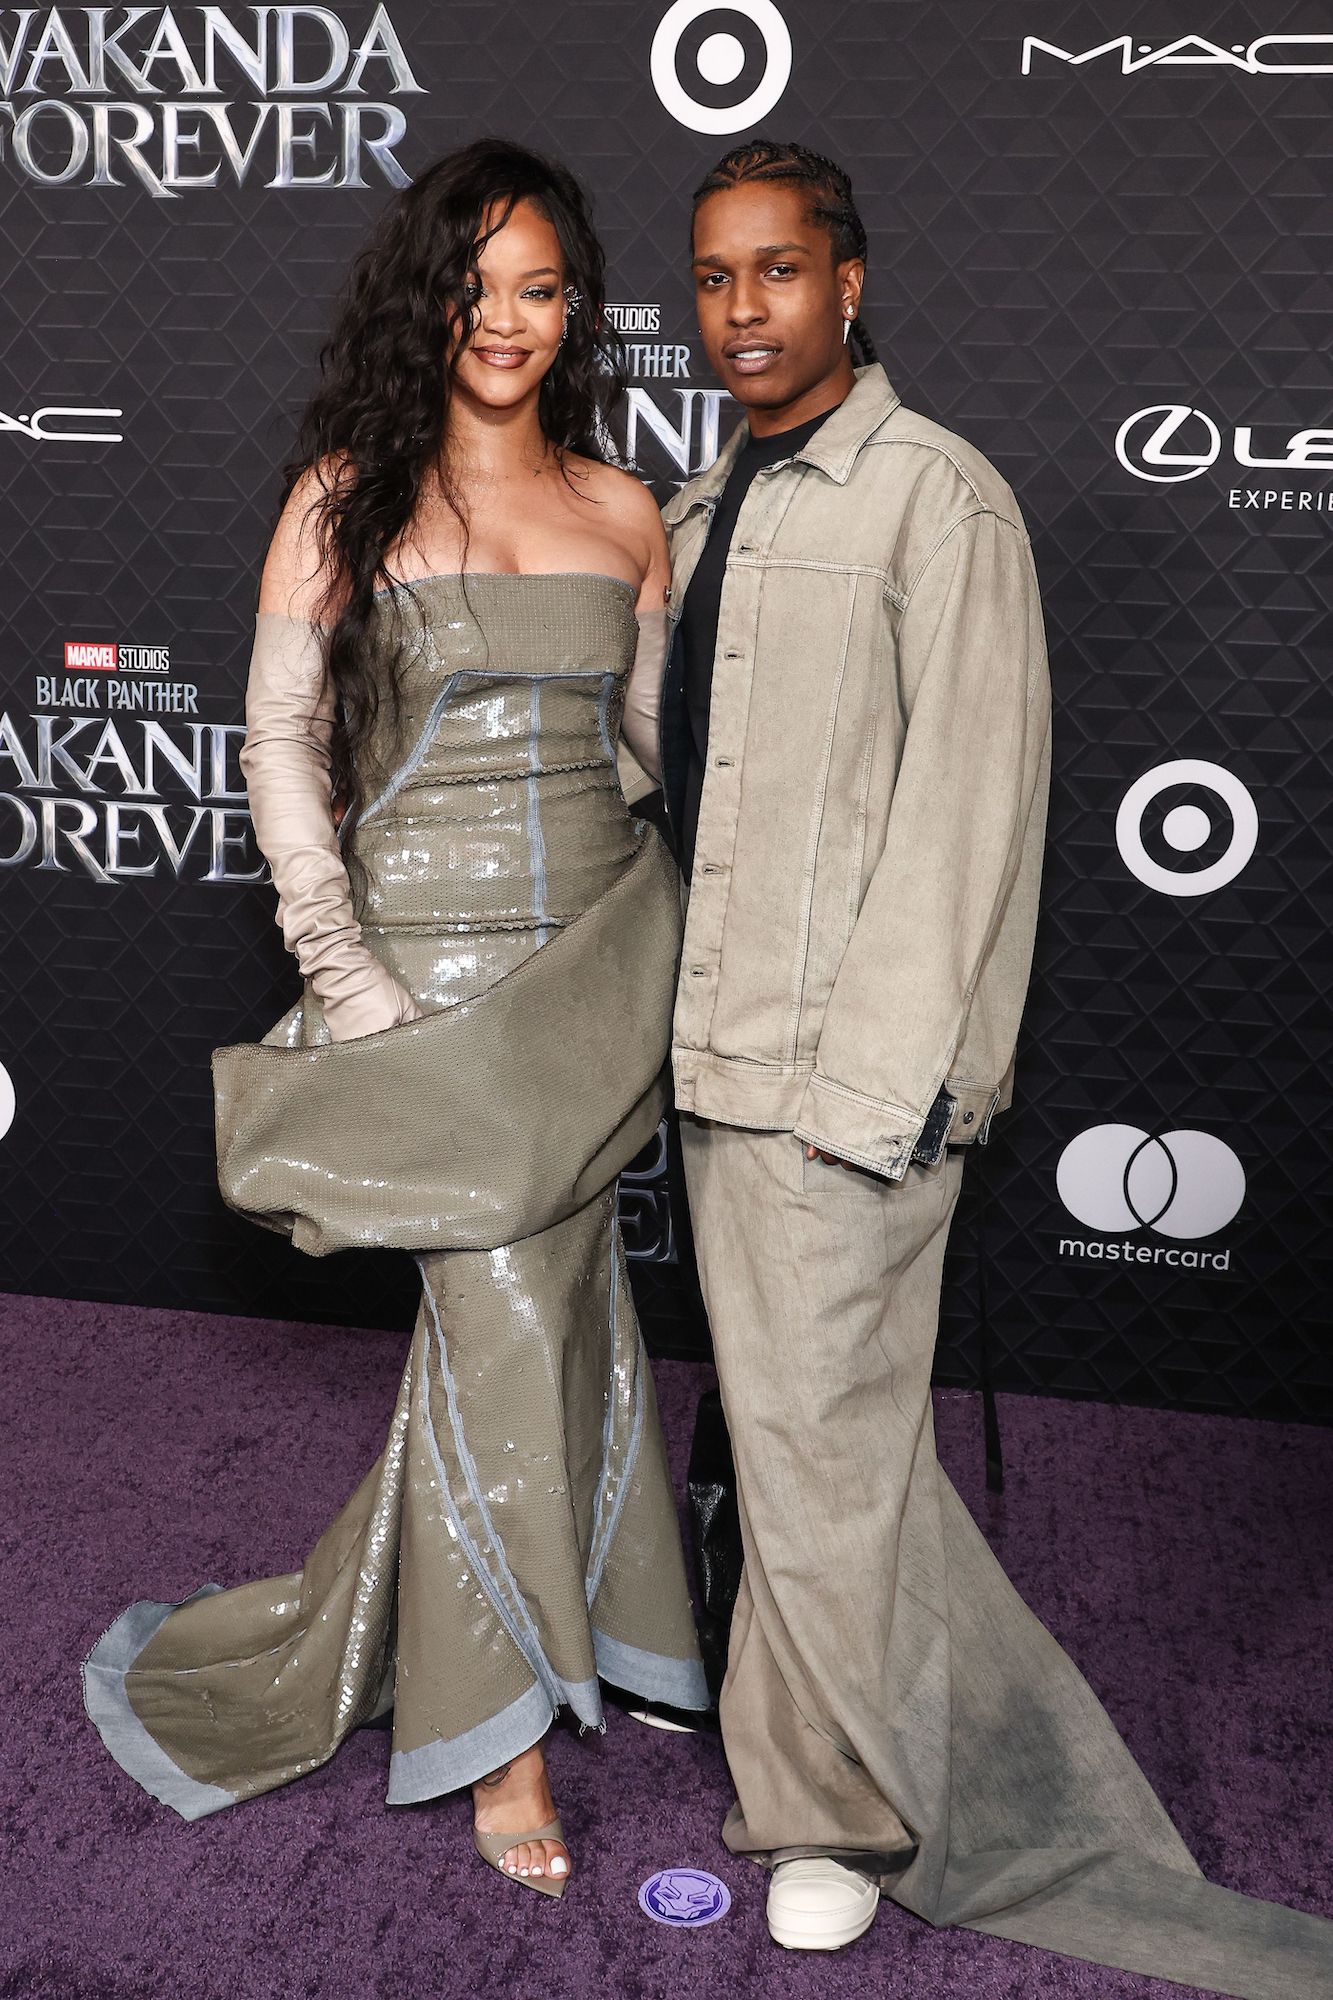 Why Fans Think Rihanna and A$AP Rocky Are Married